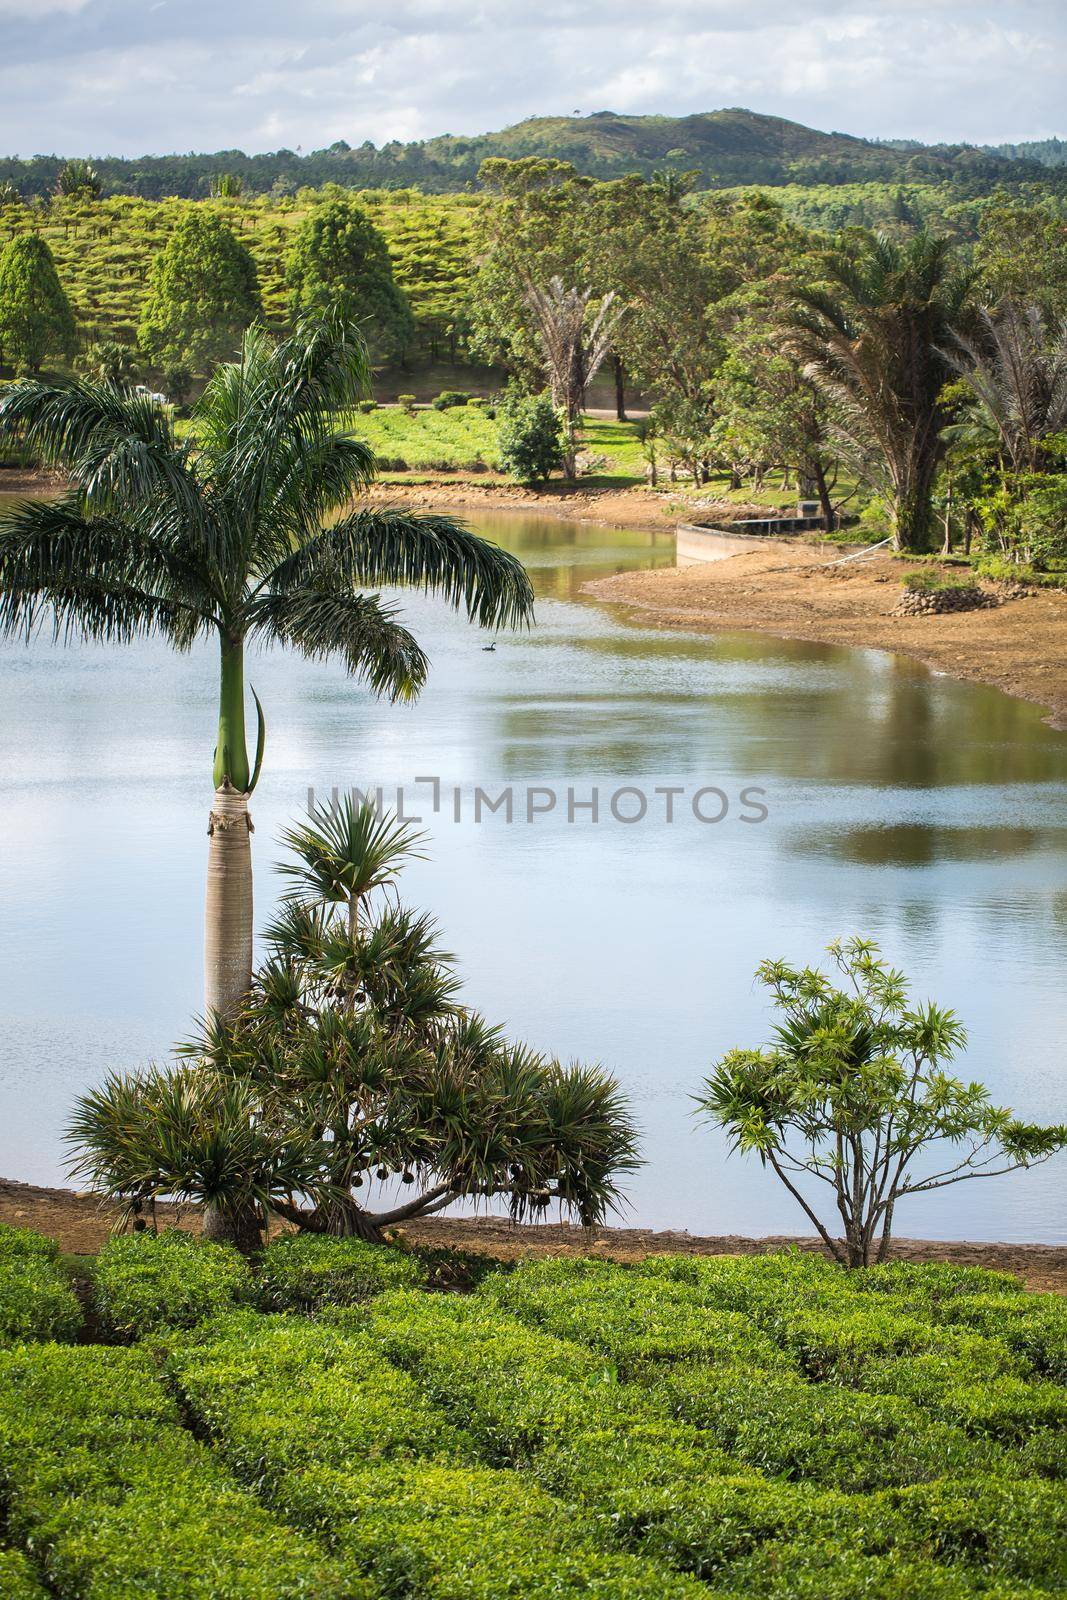 Views of tea plantation, a lake and palm trees by StudioPeace